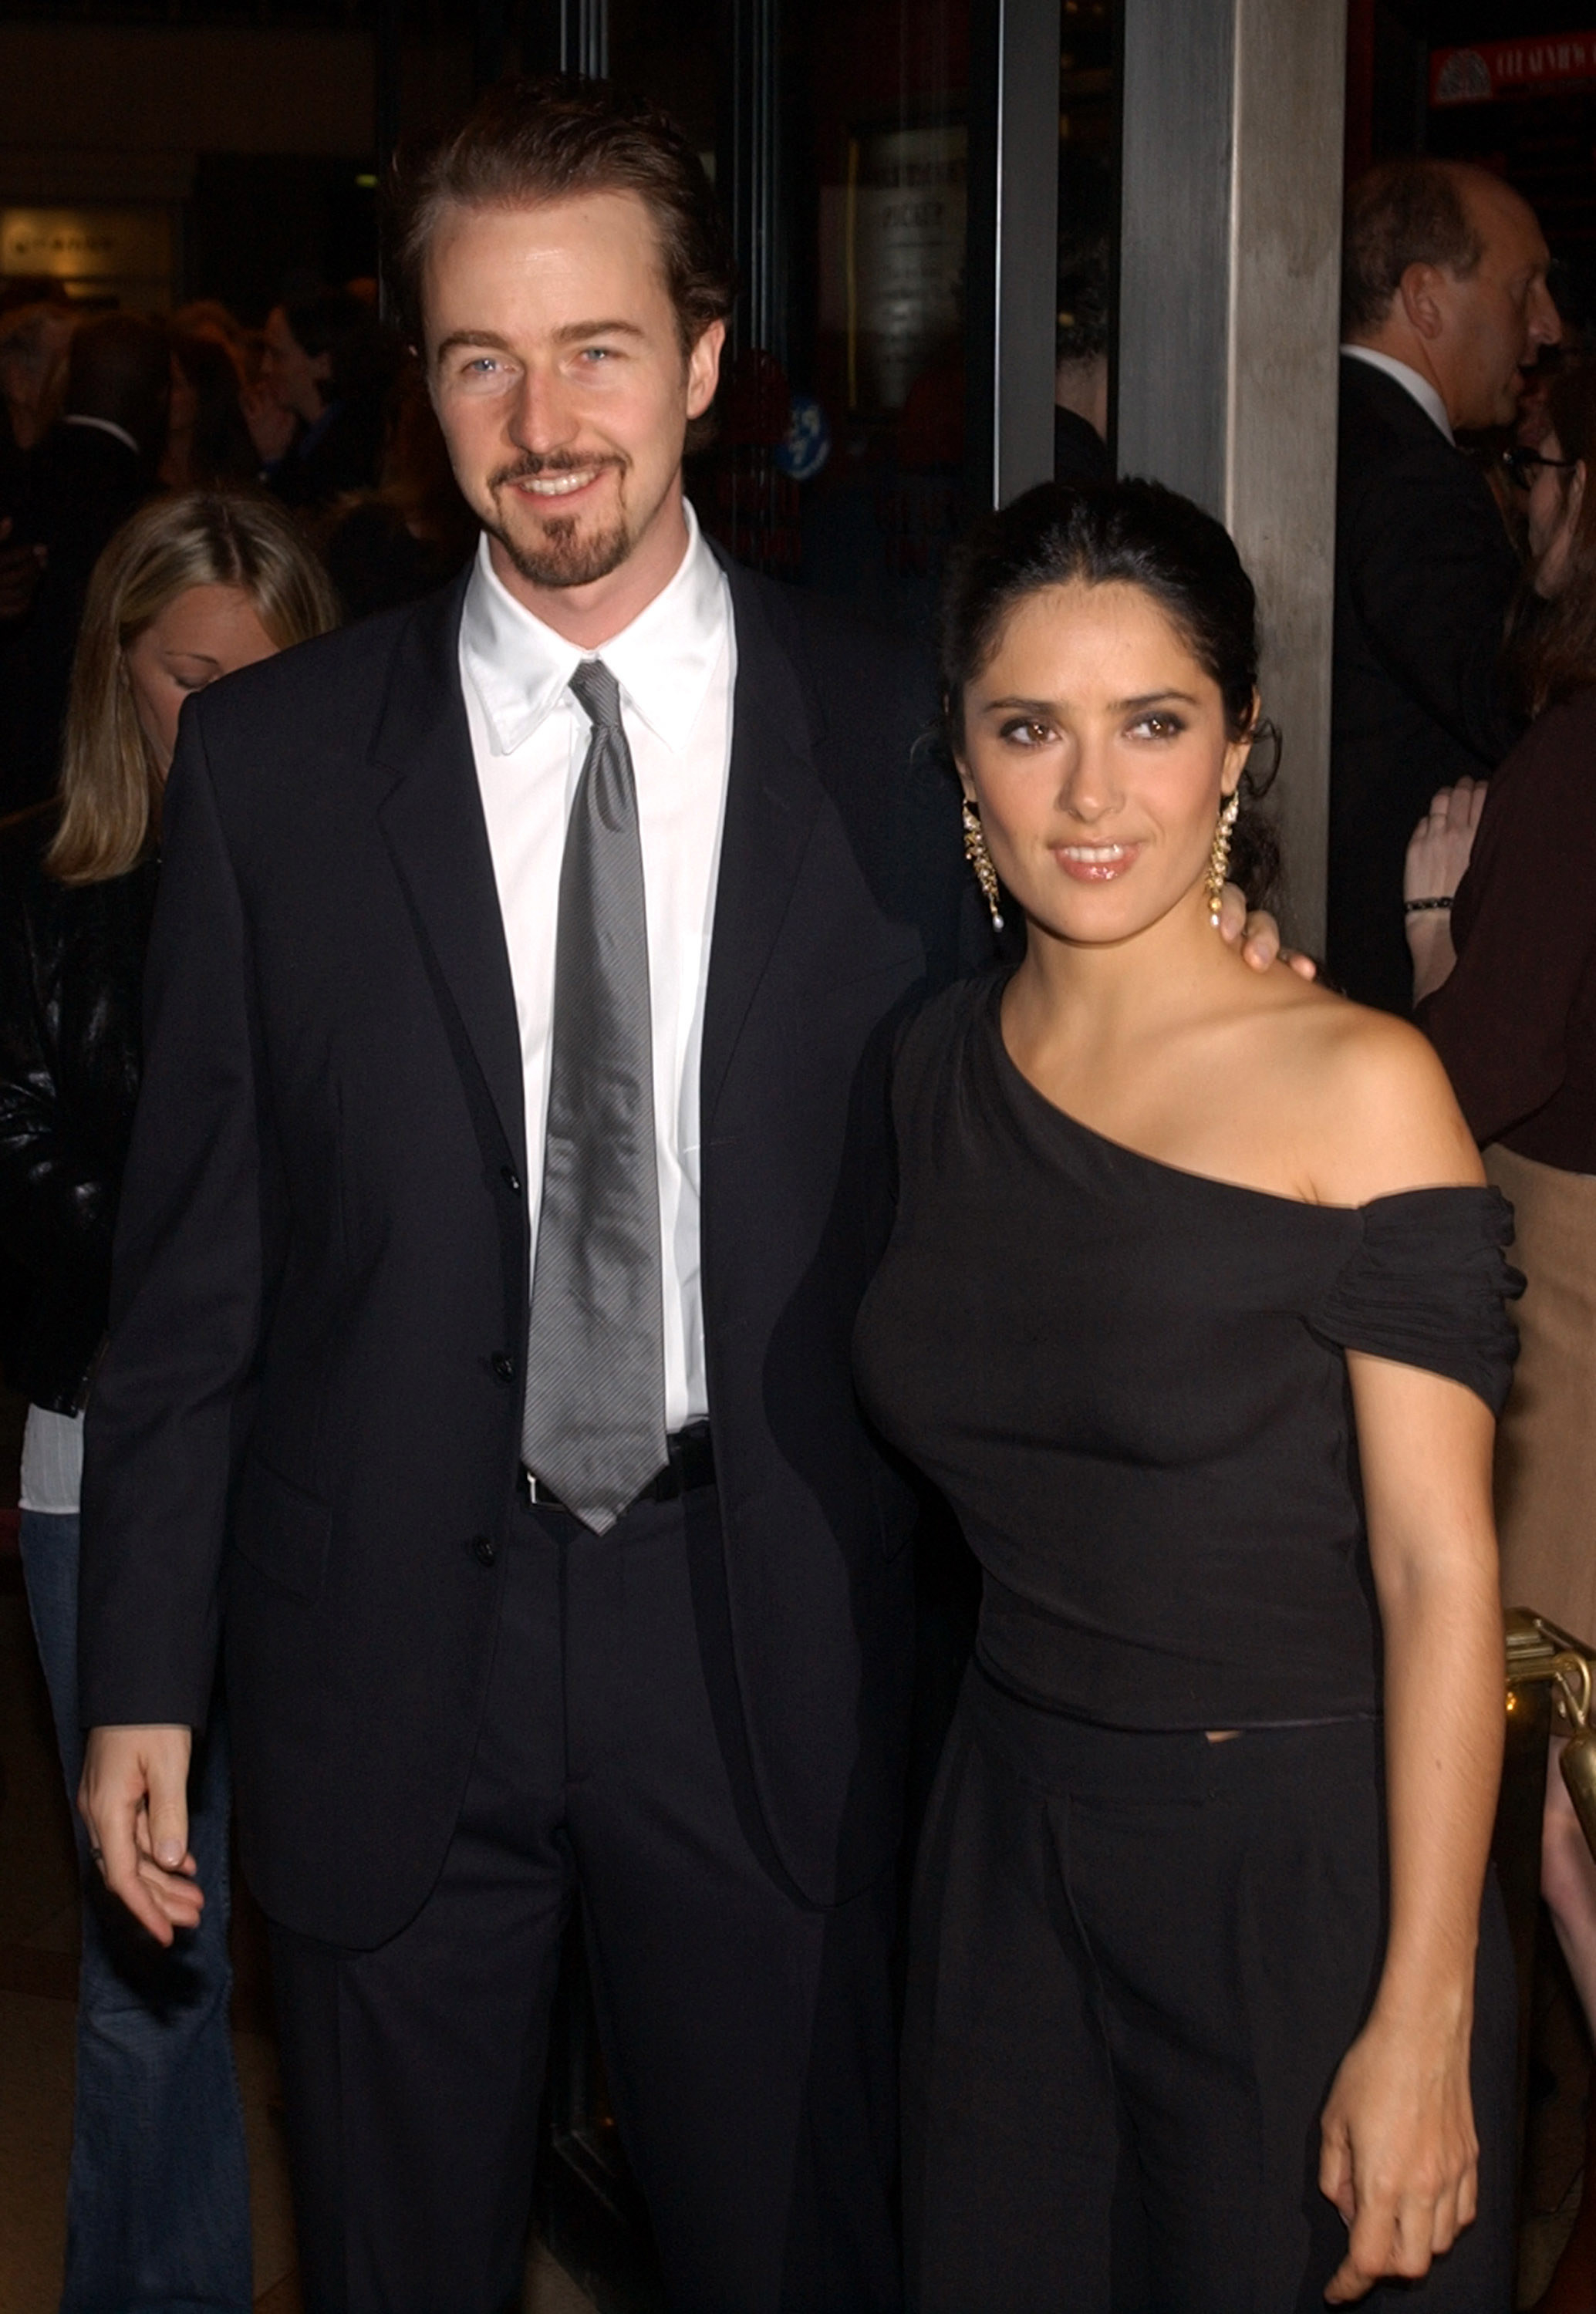 Edward Norton, wearing a suit and tie, stands with his arm across Salma Hayek&#x27;s shoulder. Salma is wearing a two-piece outfit and her hair pulled back